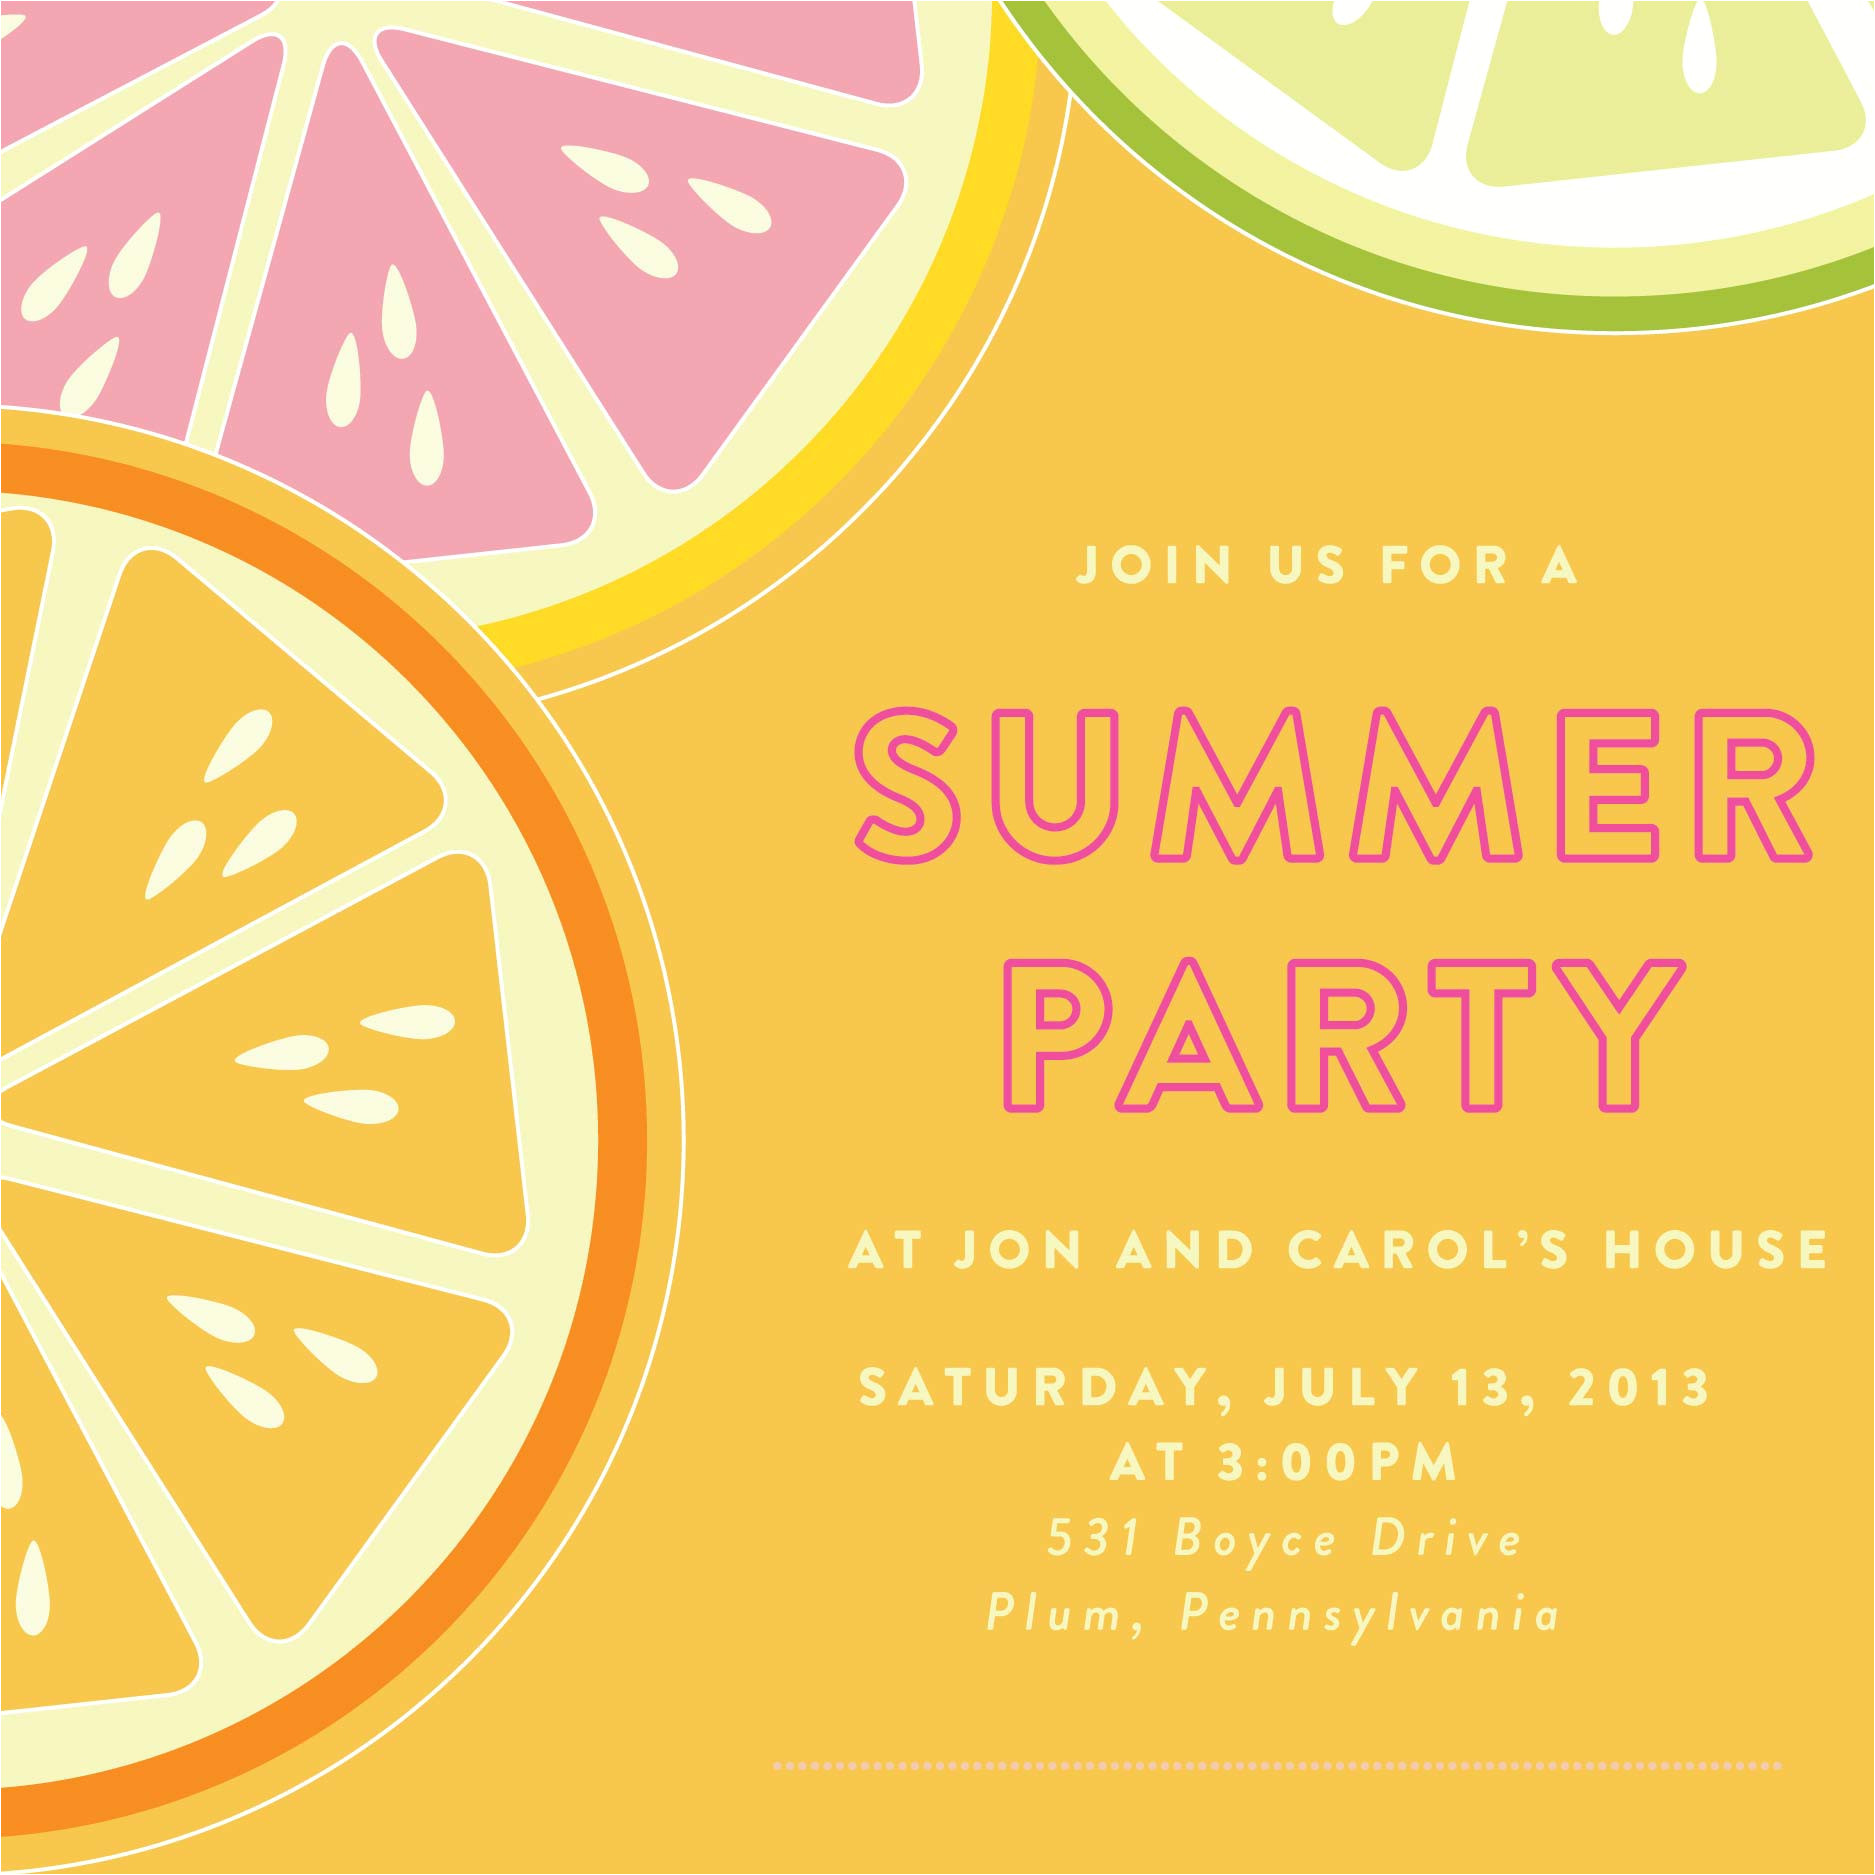 Summer Party Invitation Template Summer Party Invitation Template Summer Party Invitation